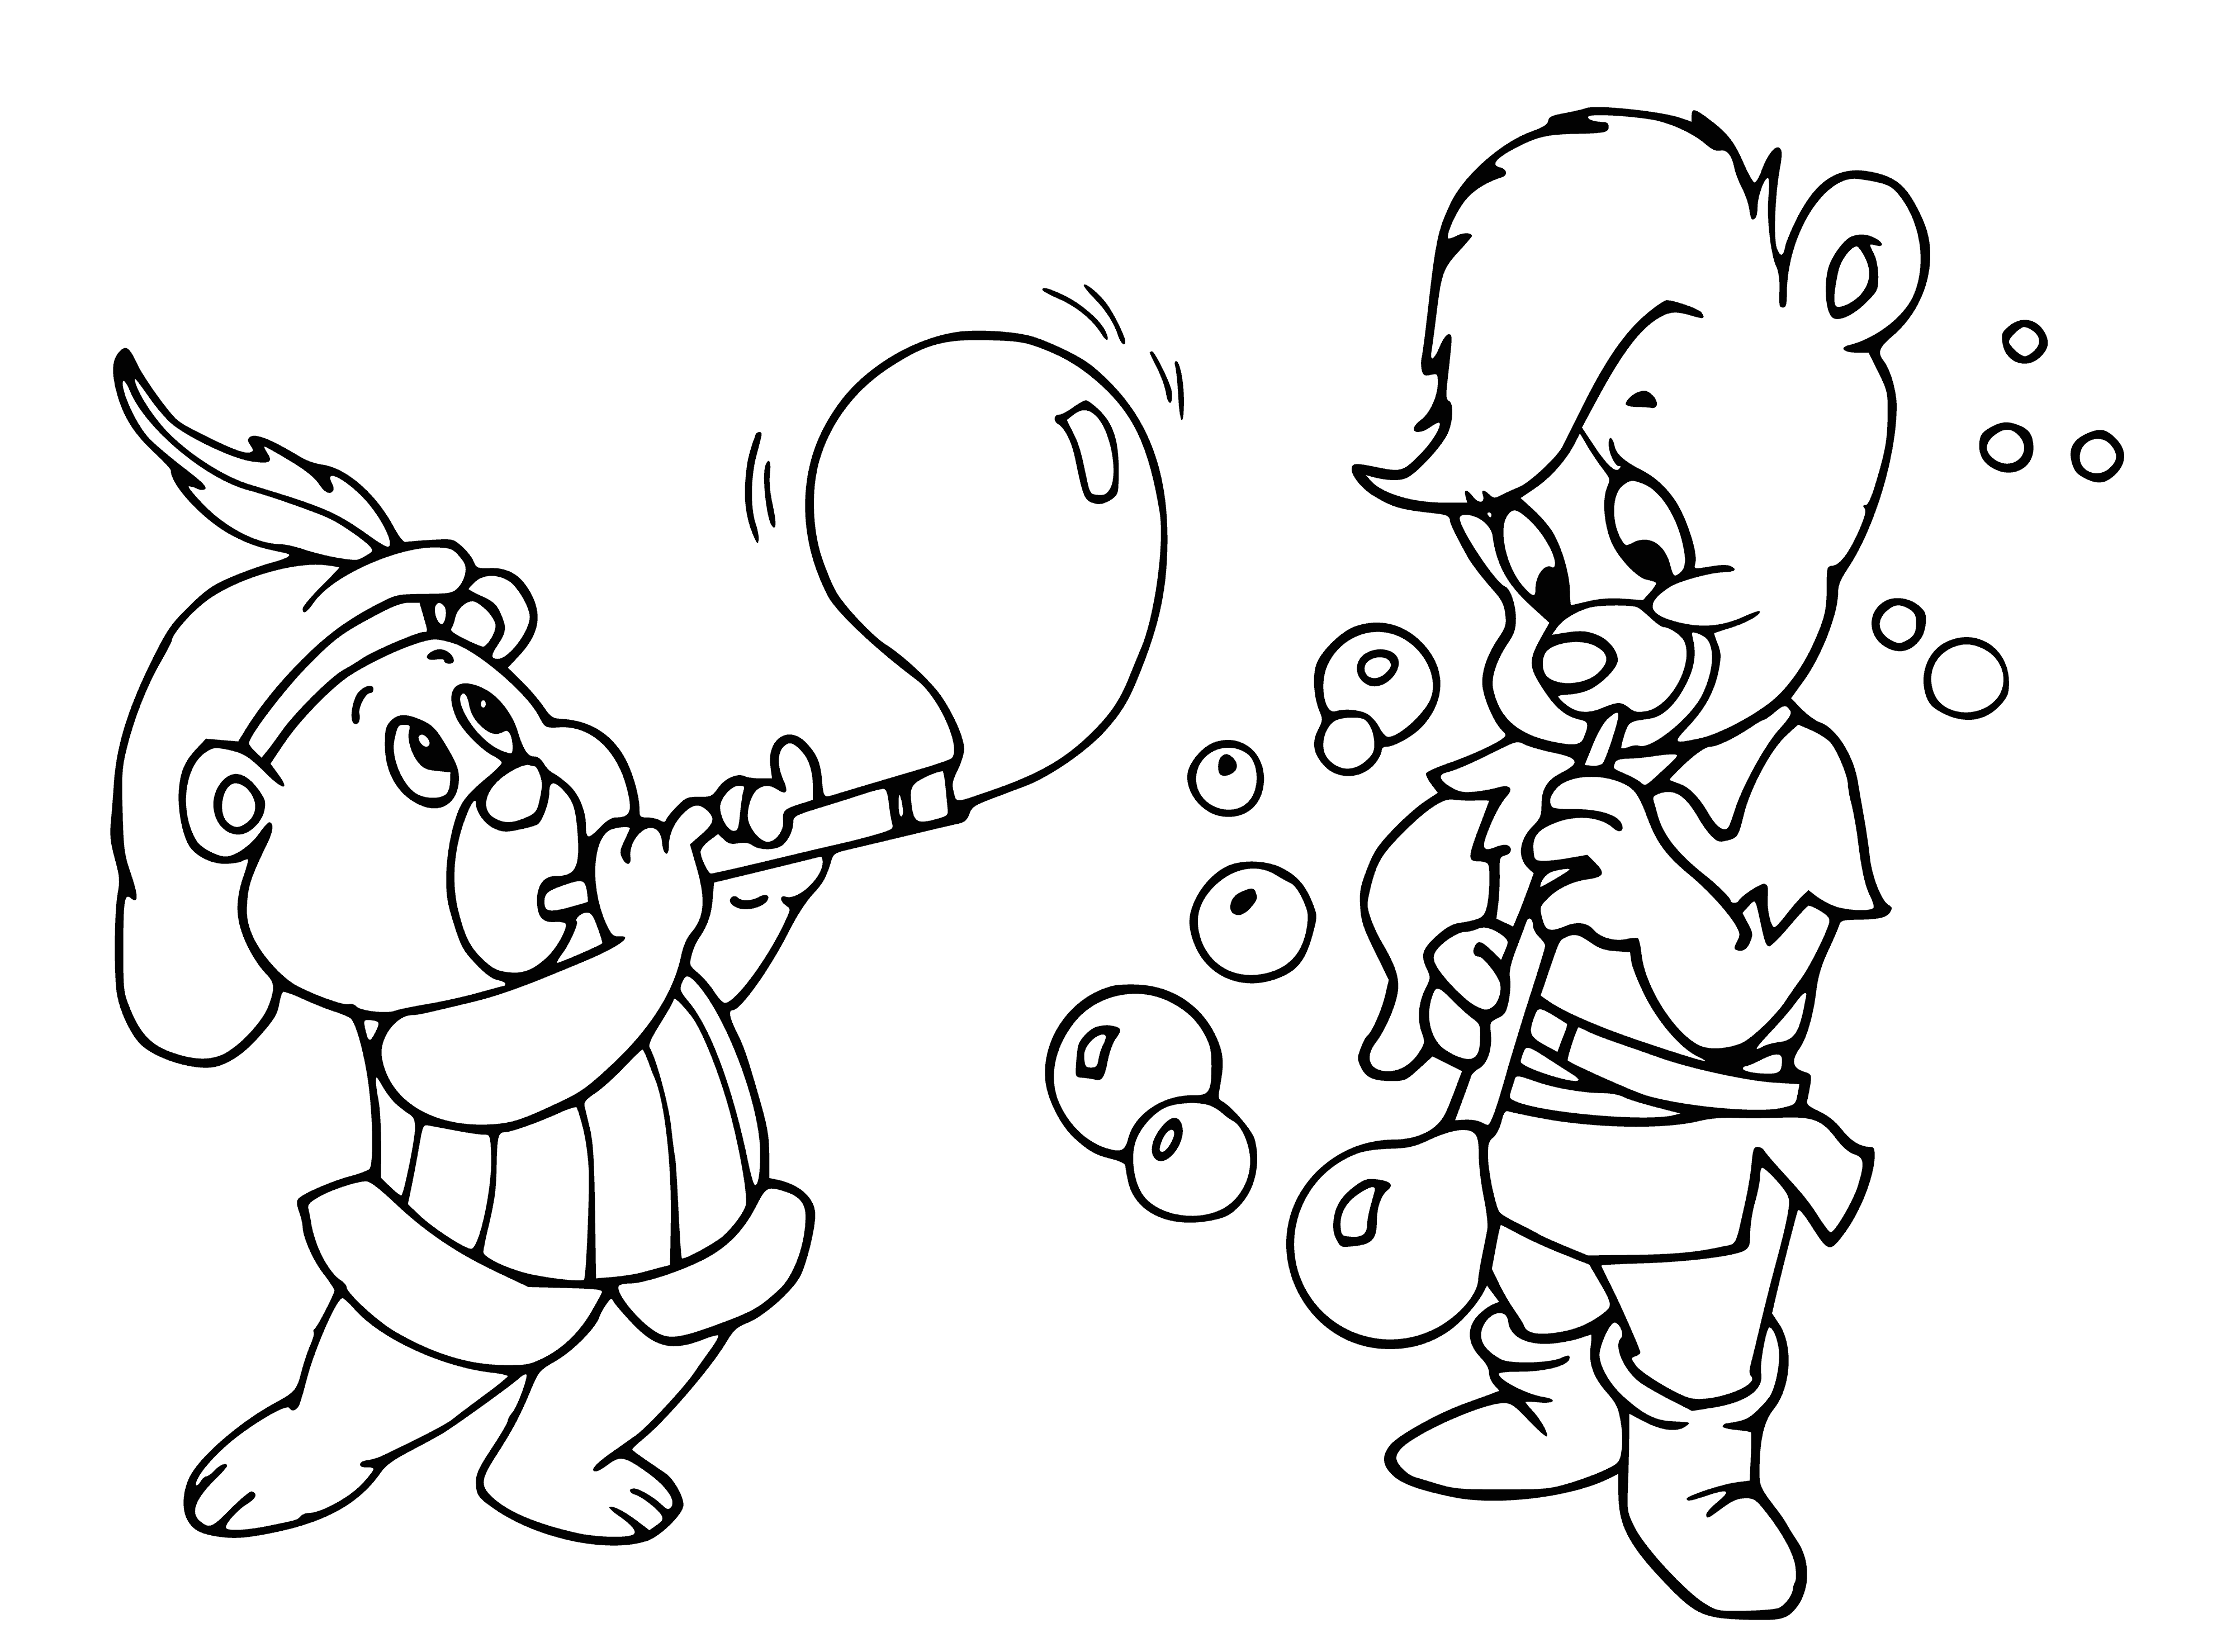 Baby and the Sun coloring page